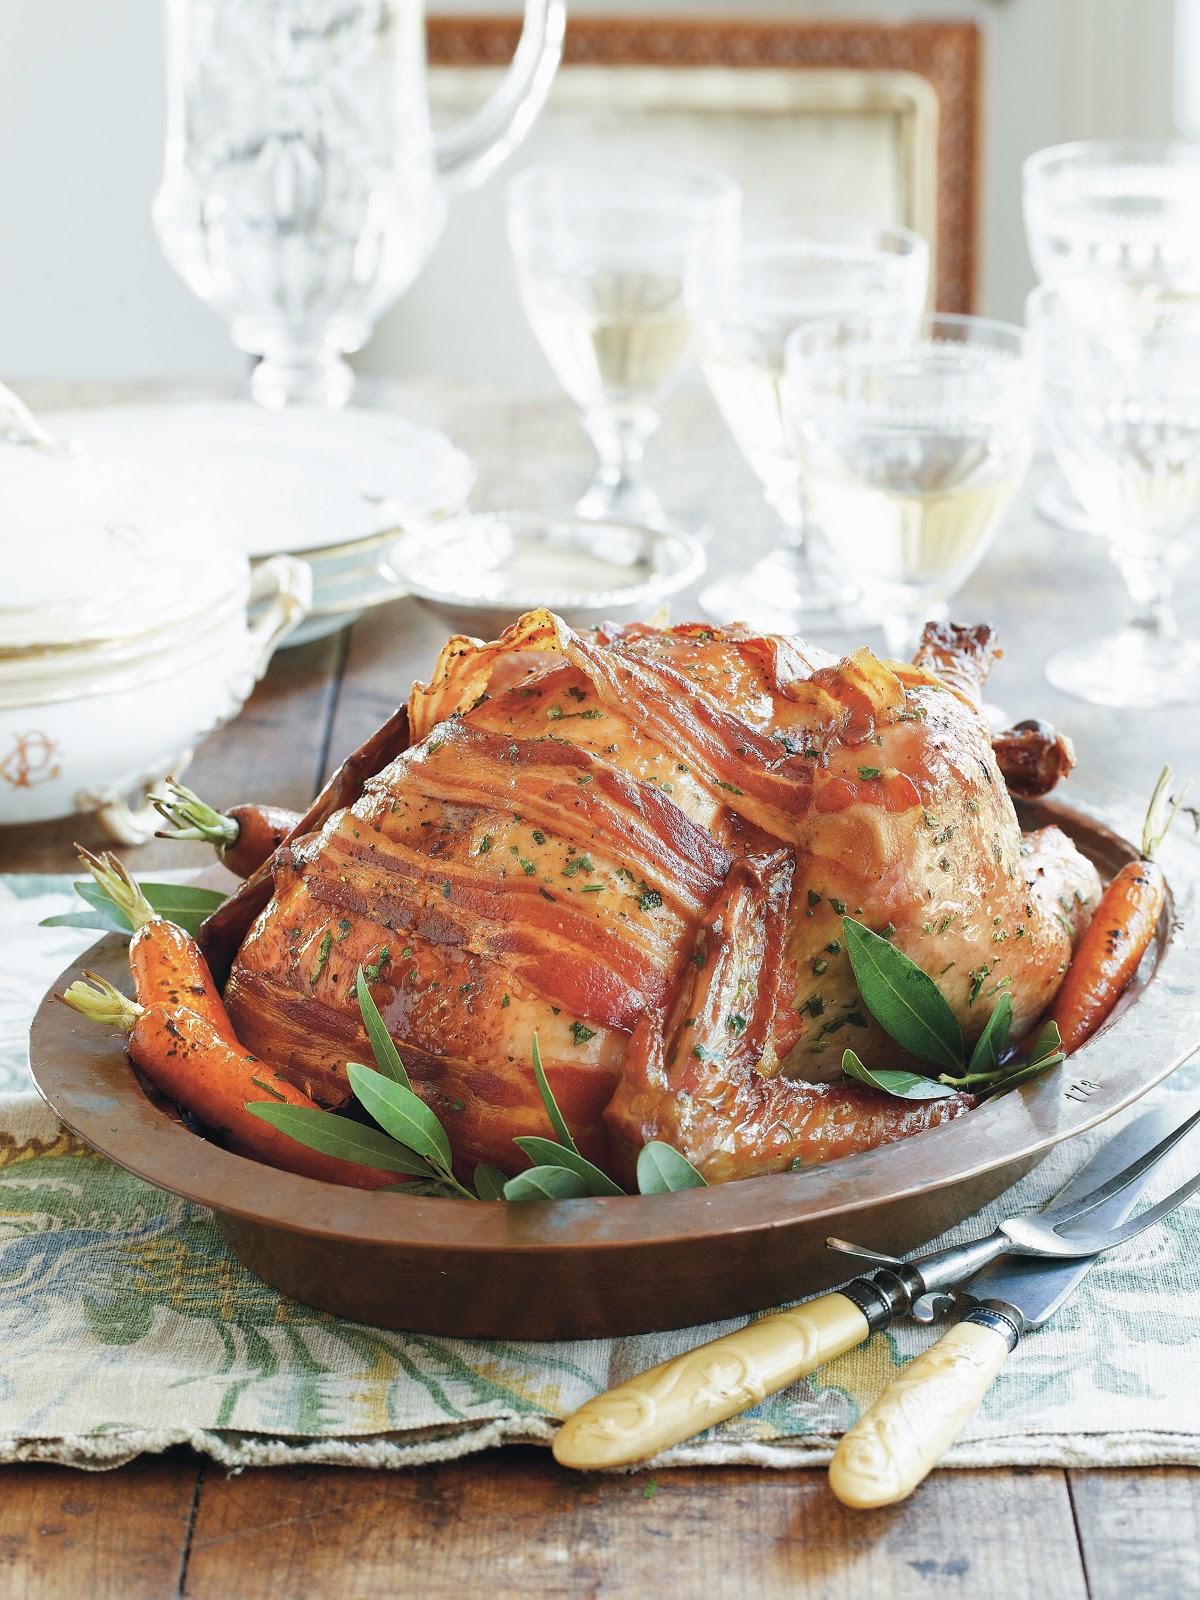 Rebecca Lang Cooks: Bacon Covered Roasted Turkey